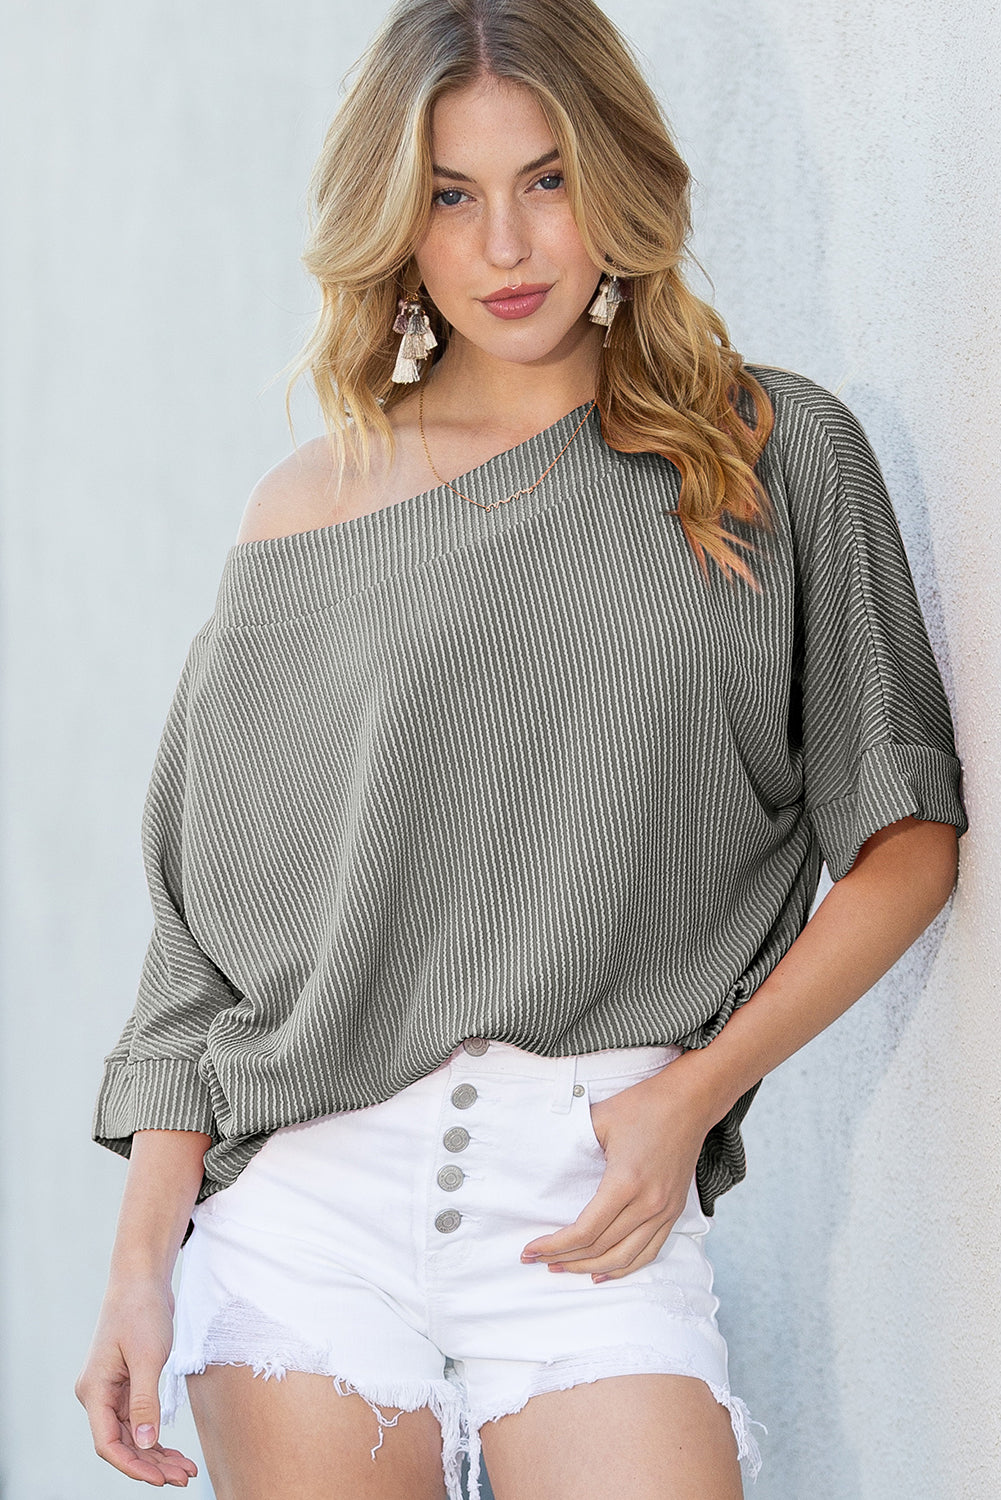 Apricot Boatneck Batwing Sleeve Cording Top